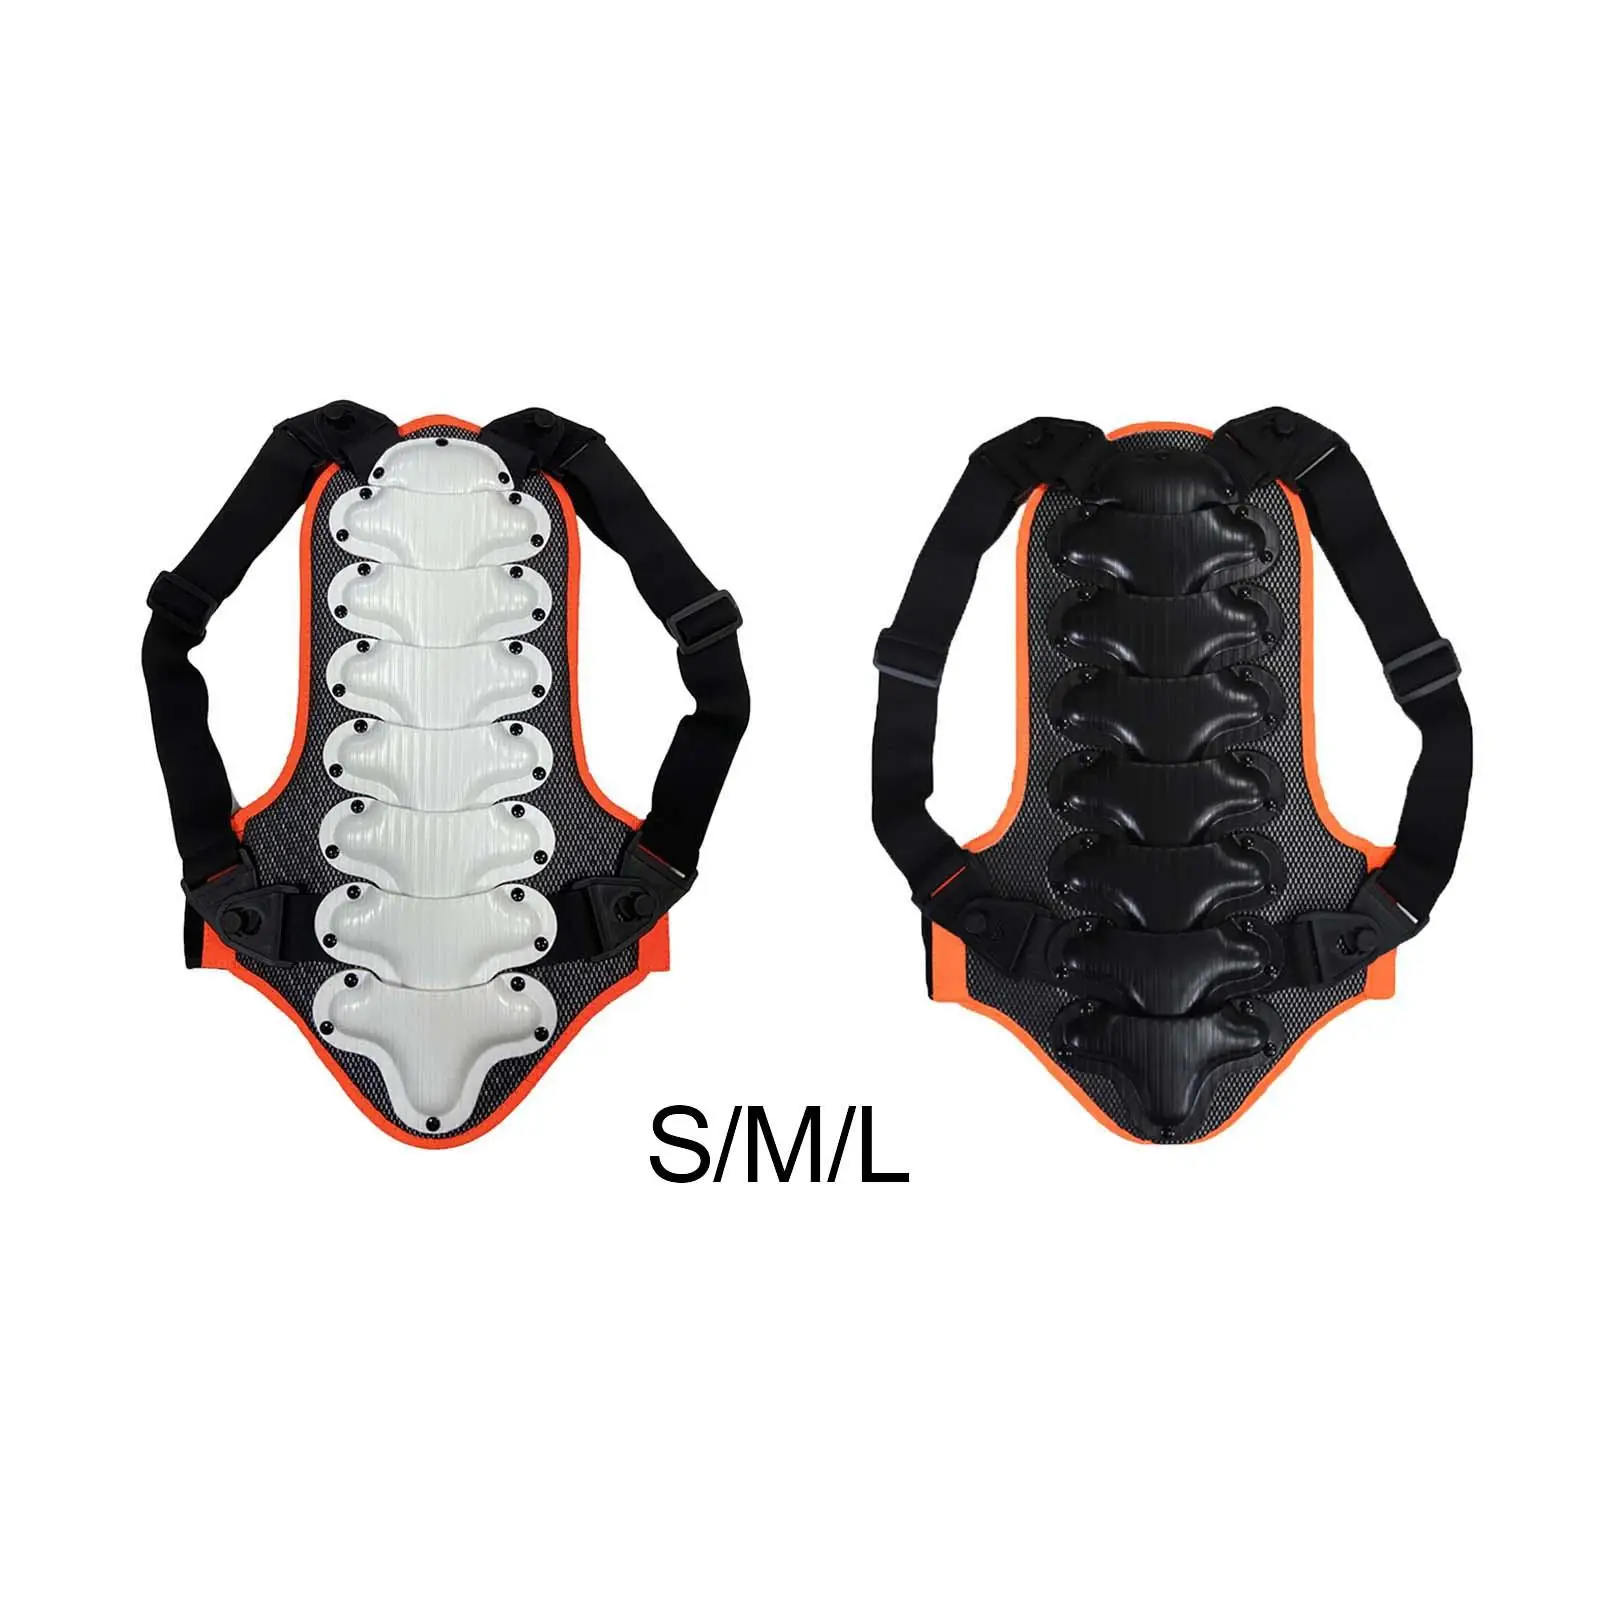 Children Back protector Guard Protection Cycling for Motorbike Outdoor Motorcross